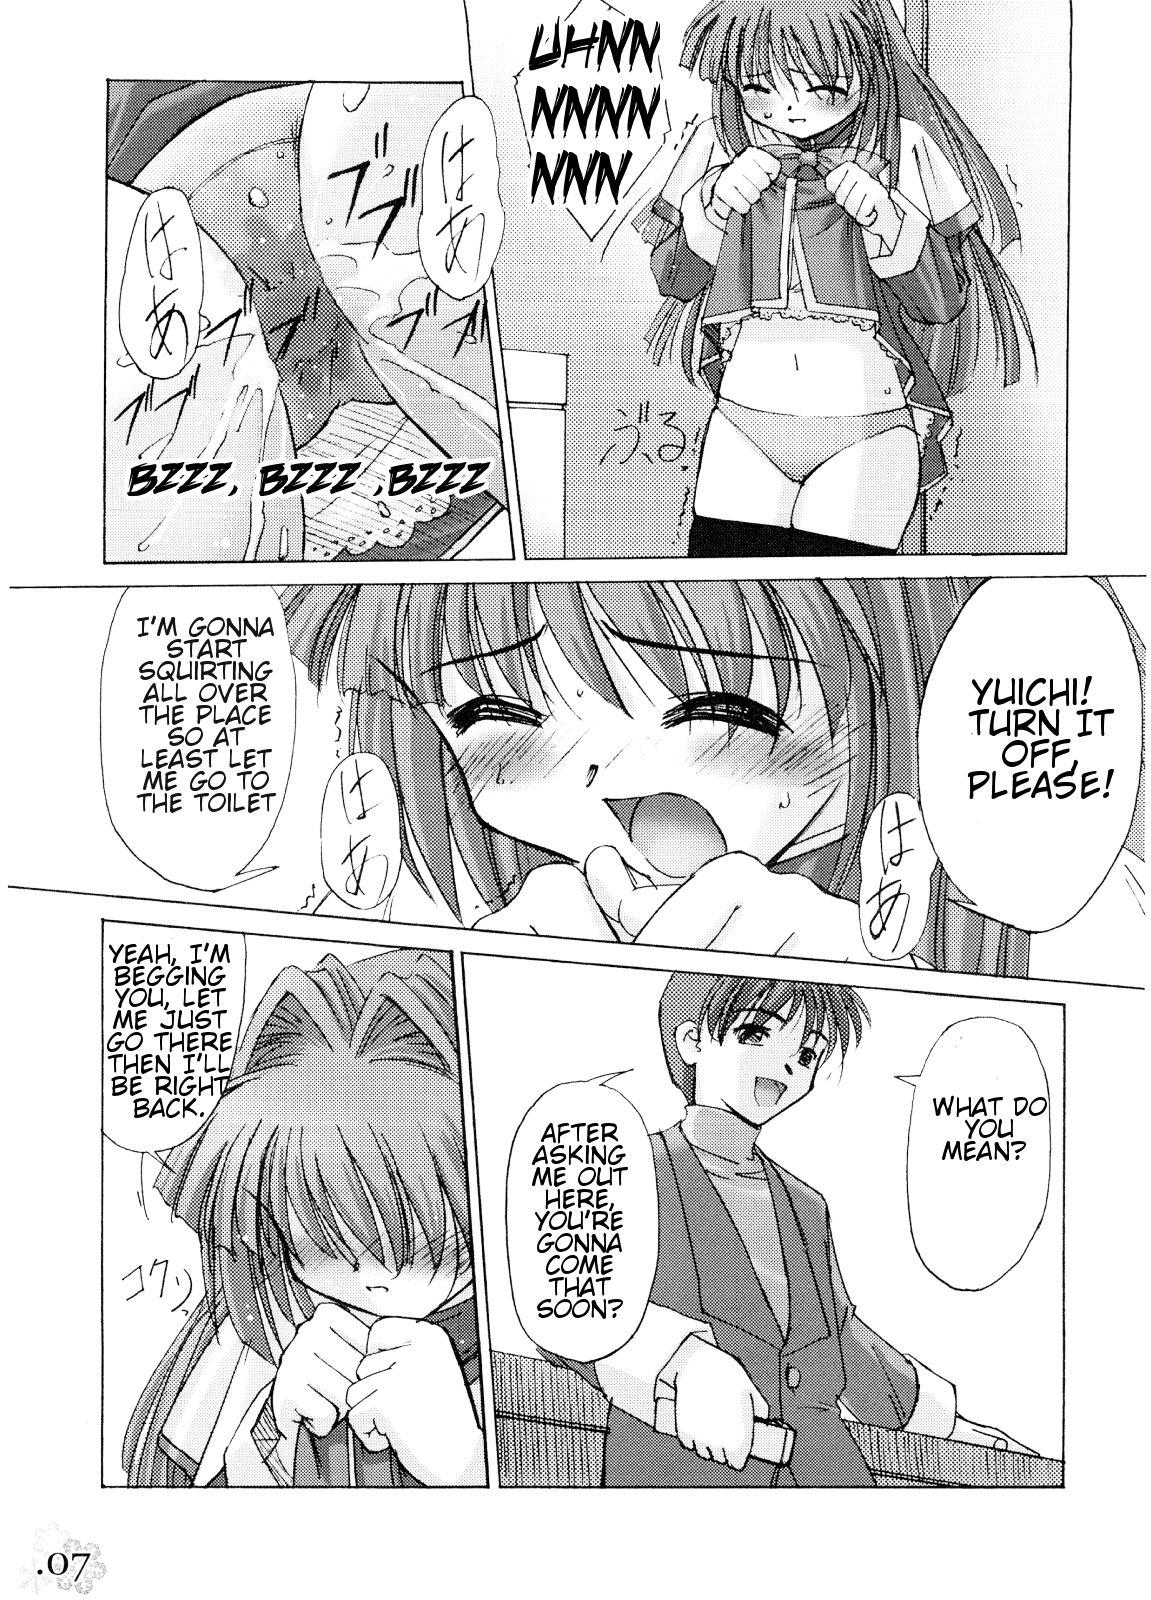 Baile You Are The Only Version: Kanon Part 2 - Kanon Hispanic - Page 4